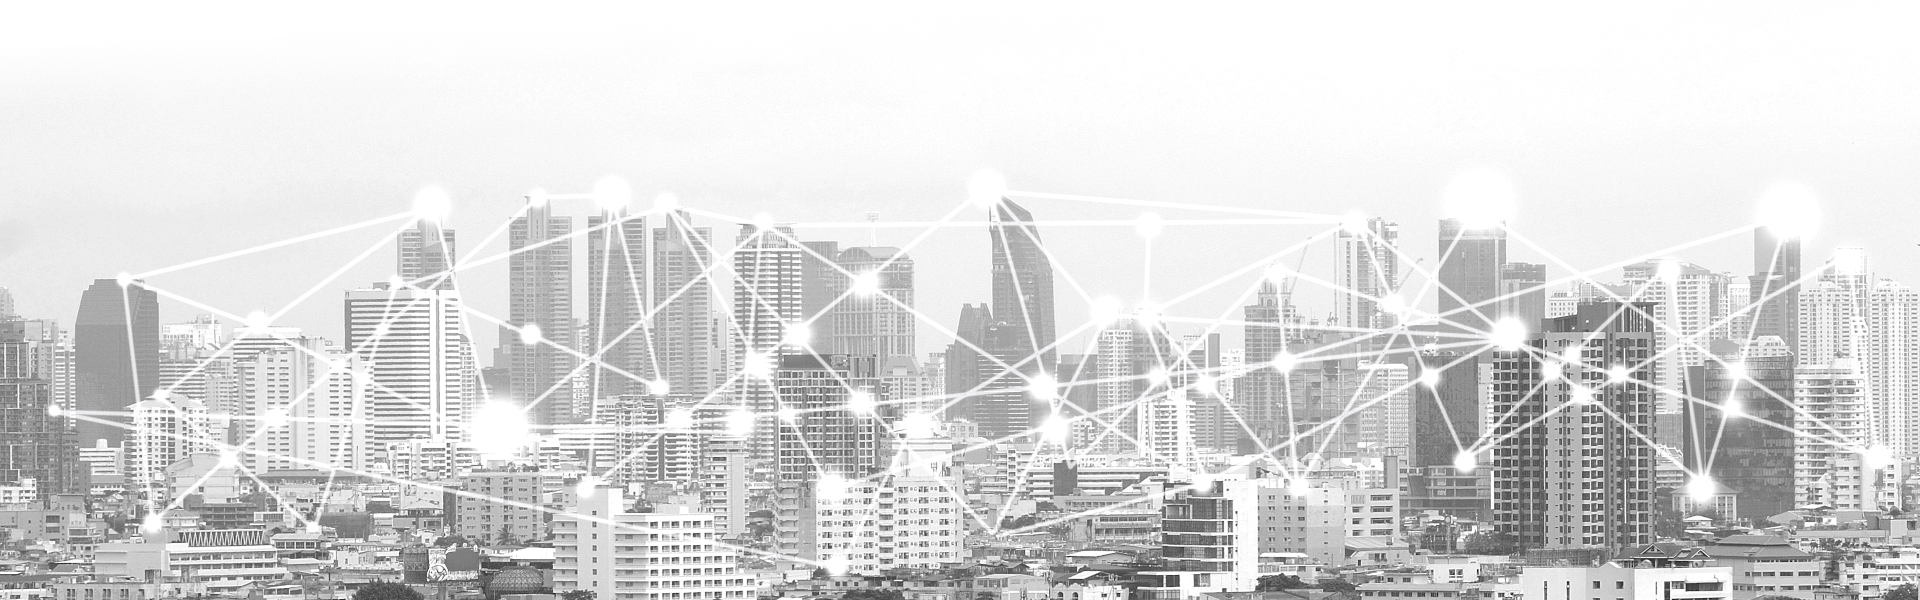 Black and white city skyline with network line vectors